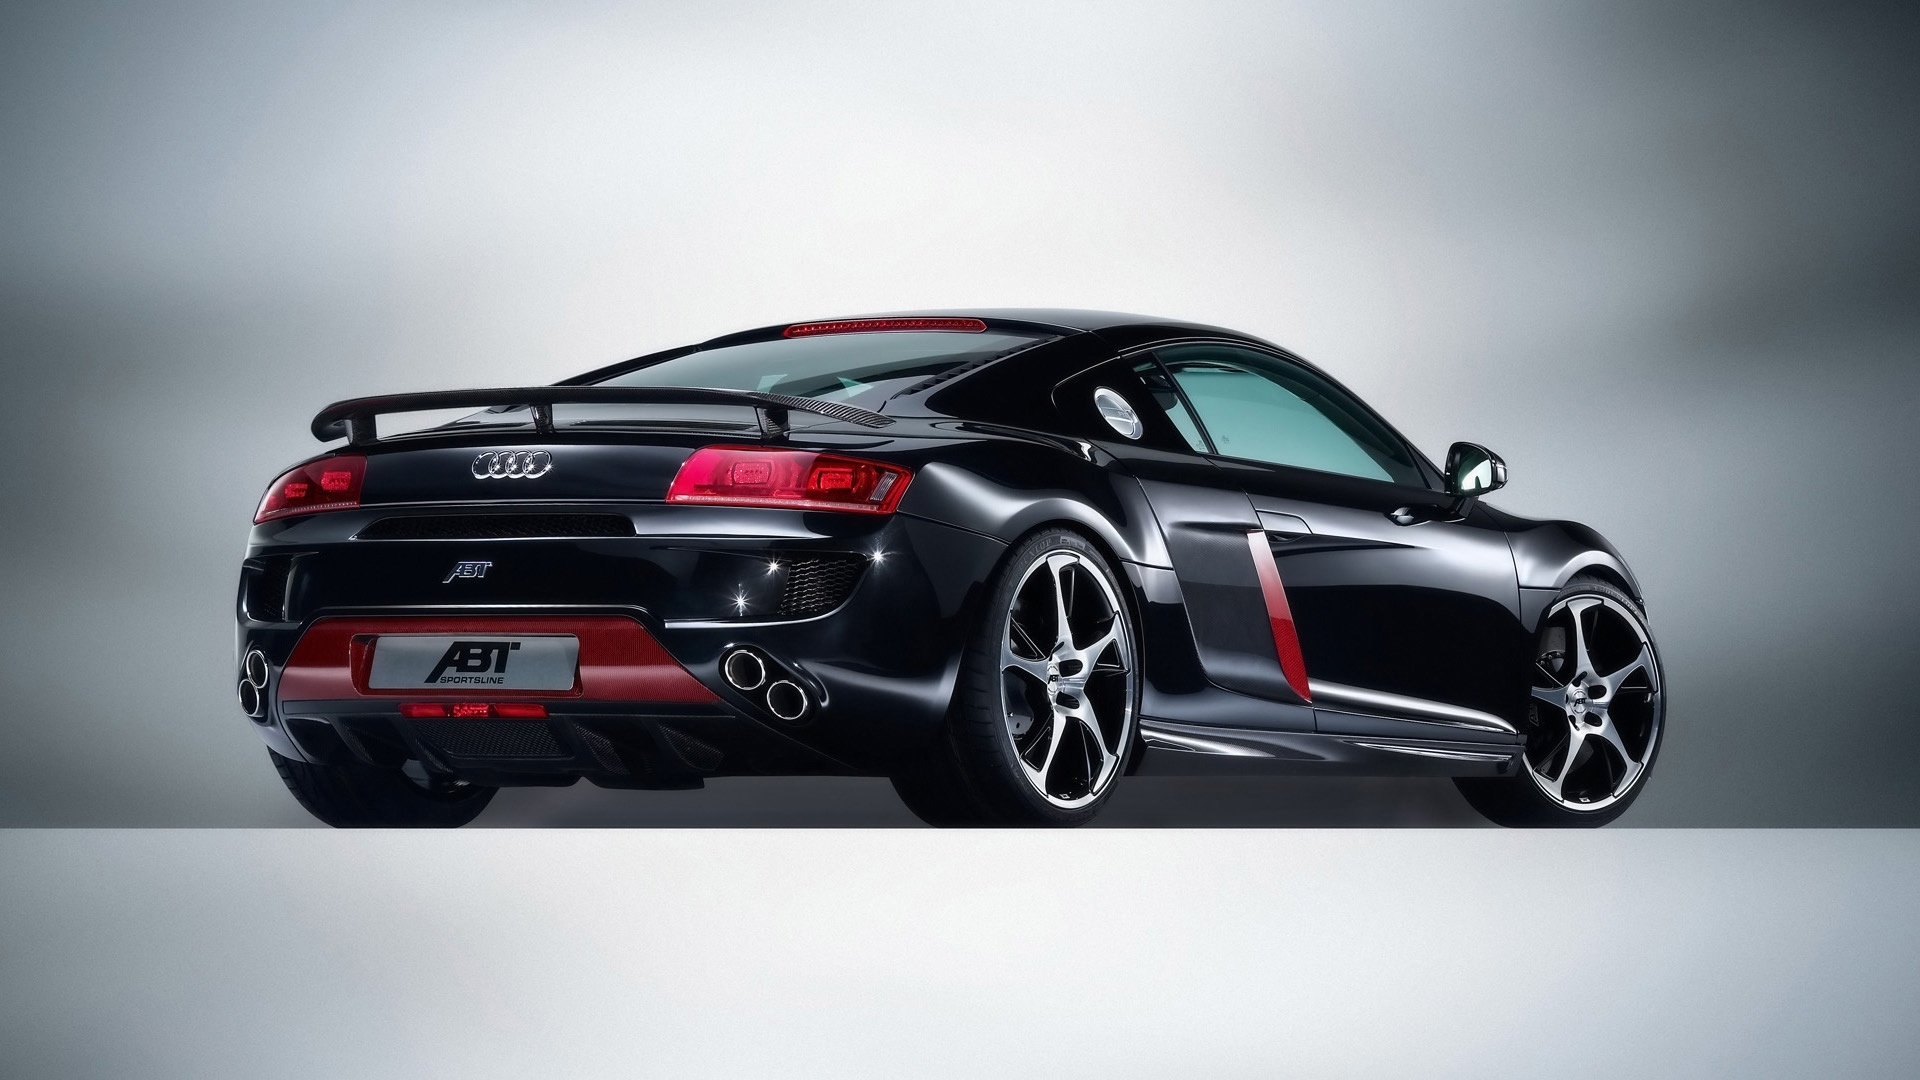 2008 Abt Audi R8 - Rear Angle for 1920 x 1080 HDTV 1080p resolution